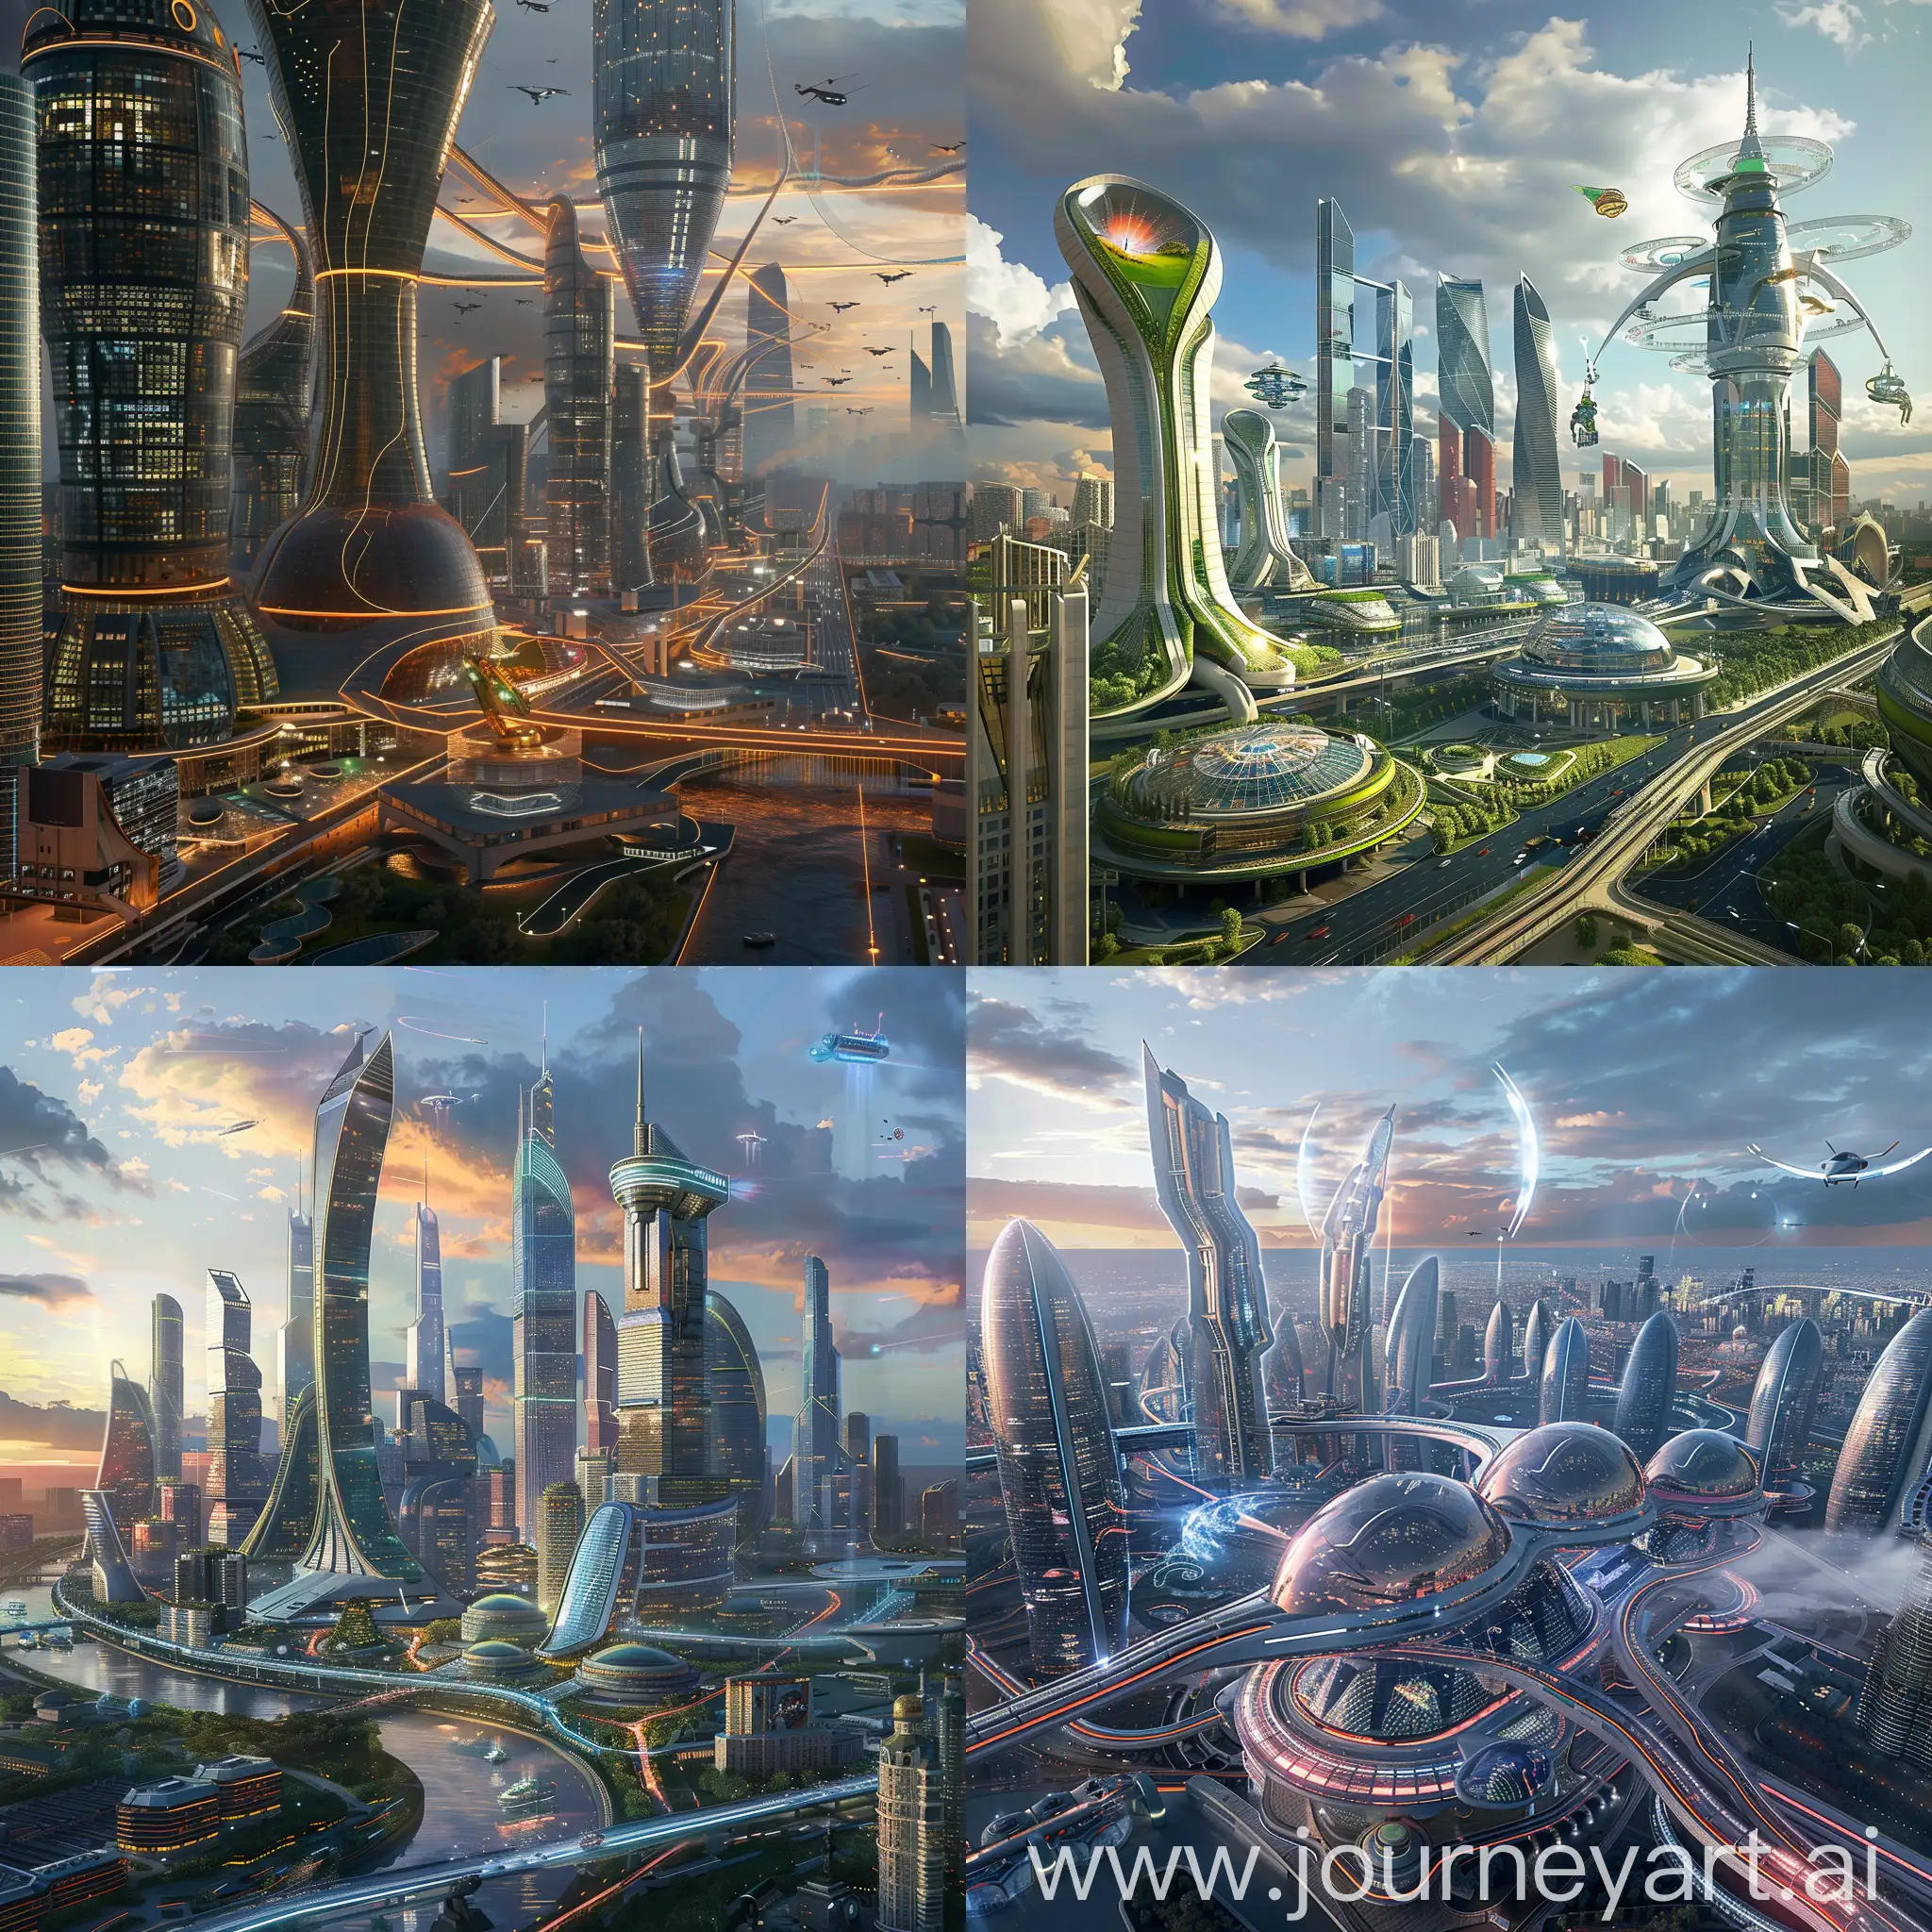 Sci-Fi Moscow, Advanced Science and Technology, Fictional Science and Technology, Skyline Synapses, Quantum Transit System, Nano-structured Façades, AI-Integrated Infrastructure, Atmospheric Purifiers, Subterranean Havens, Energy Webs, Robotic Maintenance Swarms, Virtual Reality Venues, Bioluminescent Parks, AI-Guided Urban Ecosystems, Smart Energy Grids, Predictive Maintenance Networks, Autonomous Public Services, Intelligent Building Management, Cognitive Traffic Systems, Responsive Public Safety, AI-Enhanced Education Hubs, Healthcare Predictive Analytics, Cybersecurity Defense Matrices, Dynamic Skyscrapers, Hovering Transport Lanes, Energy-Harvesting Bridges, Interactive Public Art, Drone Delivery Hubs, Environmental Shields, Architectural Light Forests, Water Purification Fountains, Augmented Reality Billboards, Space Elevator Complex, AI-Integrated Façades, Quantum Transit Systems, Robotic Construction Swarms, Atmospheric Purifiers, Nano-Engineered Parks, Interactive Lightways, AI-Managed Waste Conversion Sites, Climate Adaptive Shelters, Holographic Signage, Spaceport Launch Pads, In Unreal Engine 5 Style --stylize 1000